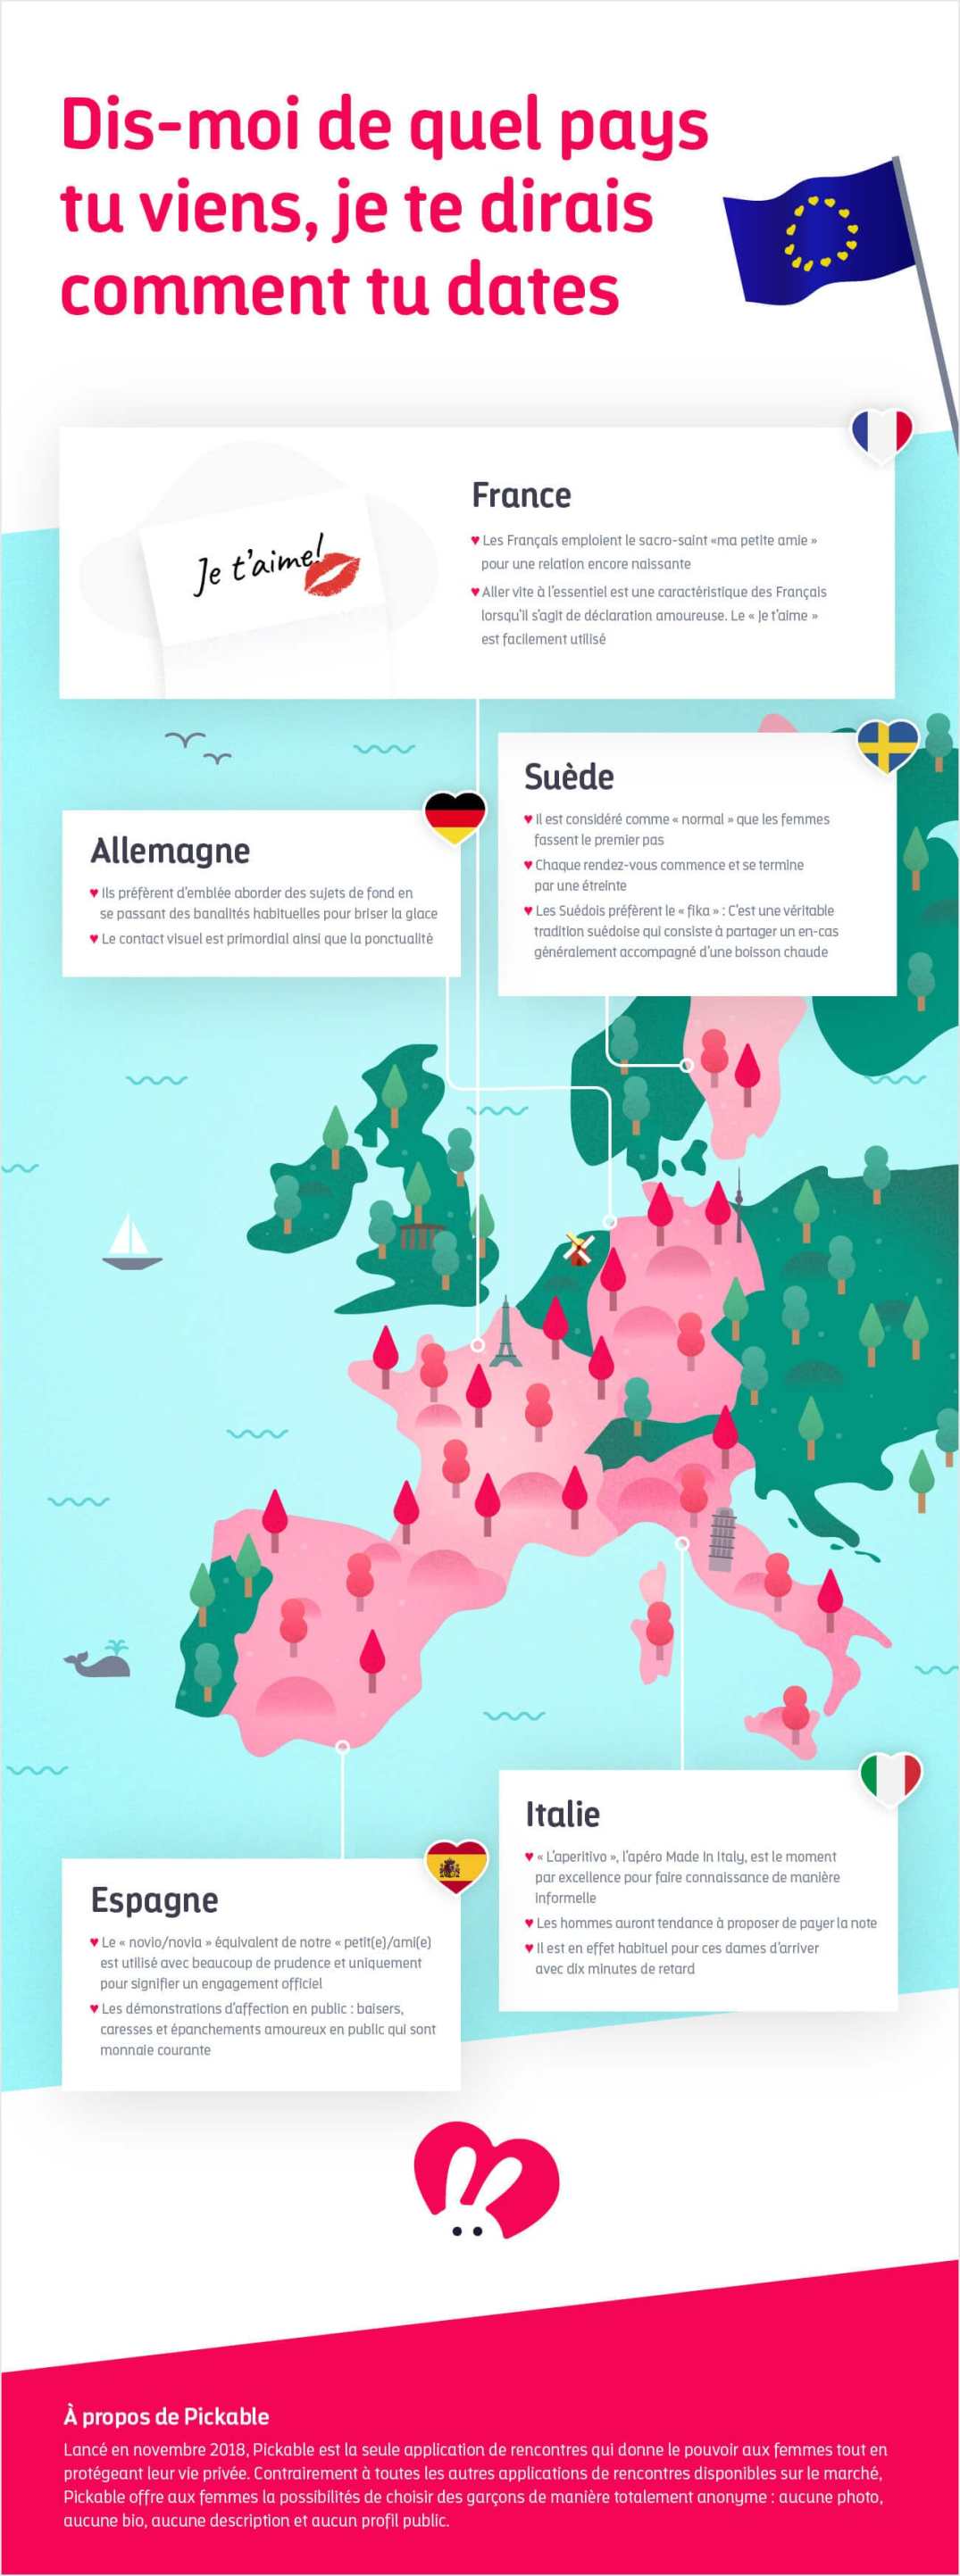 Pickable_Infographic_date-europe_FR